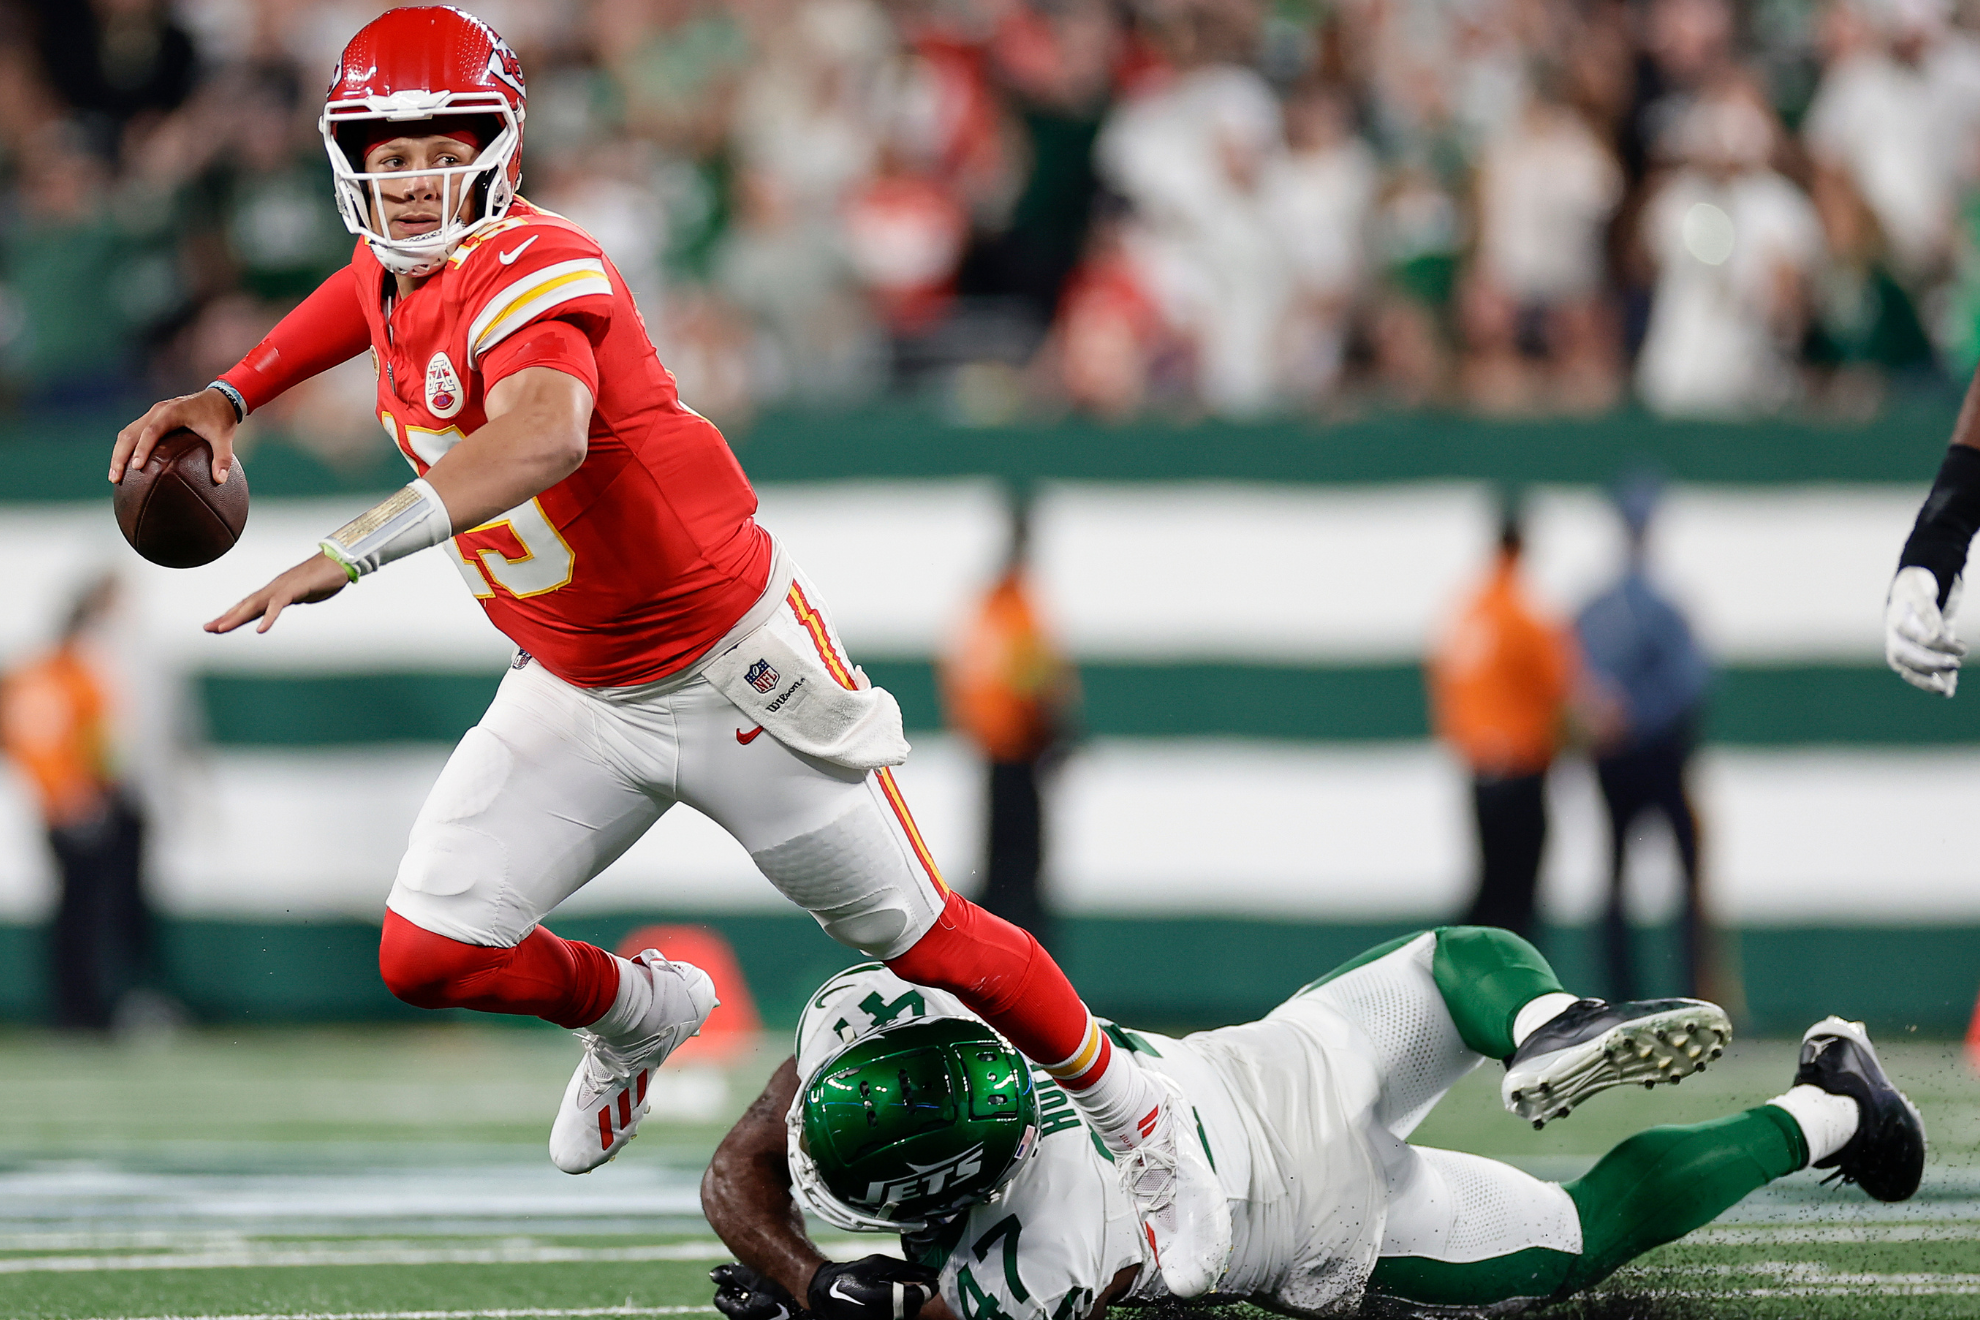 Mahomes accounted for 254 total yards as Kansas City withstood a furious Jets rally.